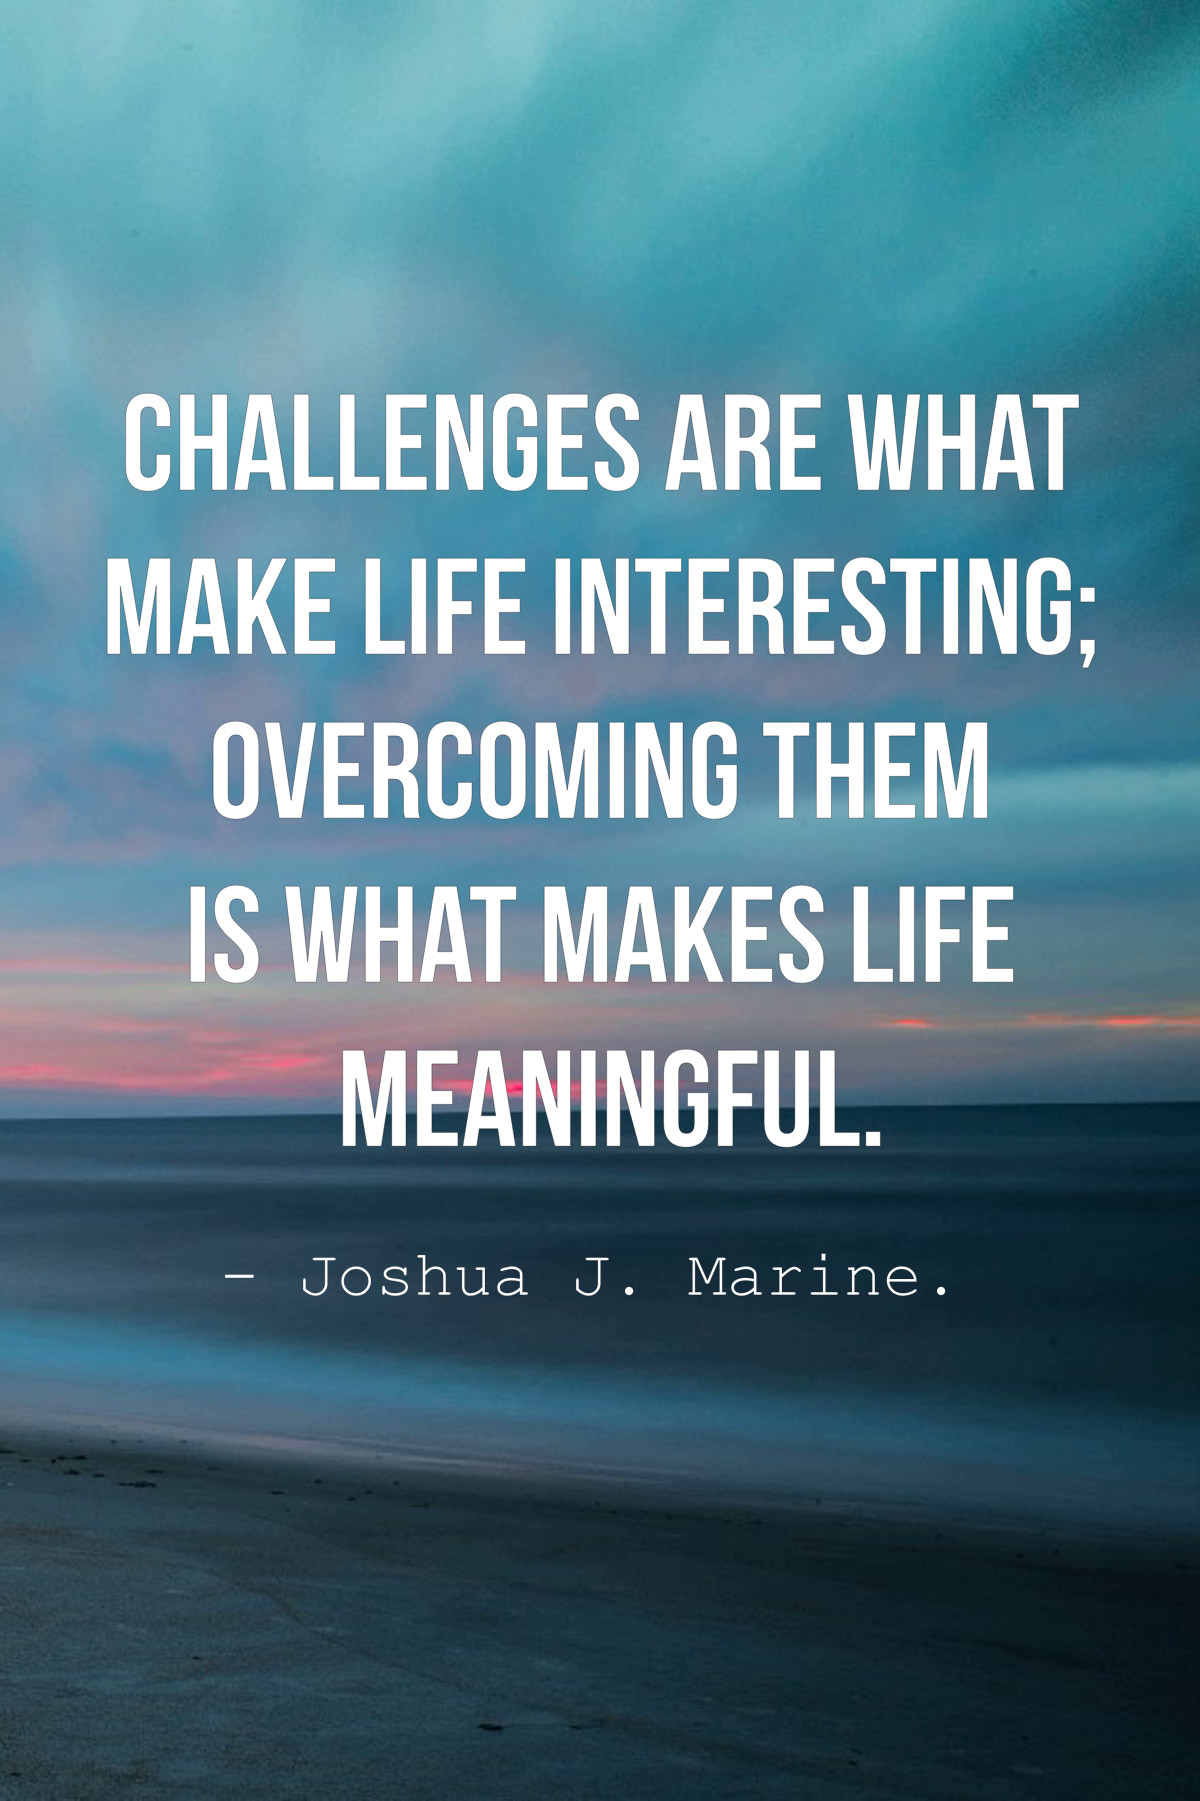 Challenges In Life Quote
 Top 50 Inspirational Challenges Quotes And Sayings